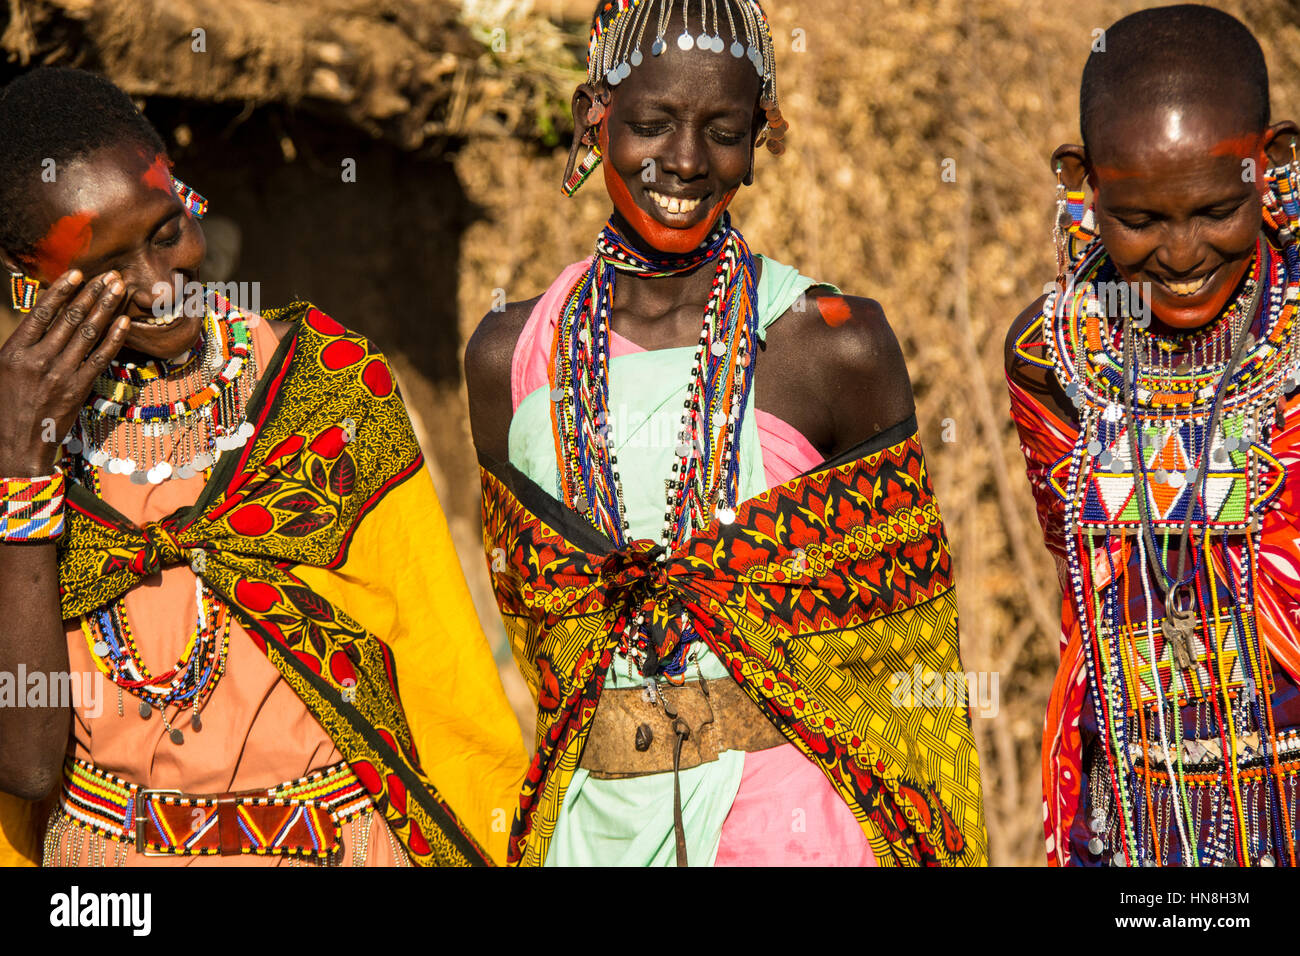 Three Maasai women, wearing traditional kangas, necklaces and earrings, laughing and smiling together in a village near the Masai Mara, Kenya, Africa Stock Photo